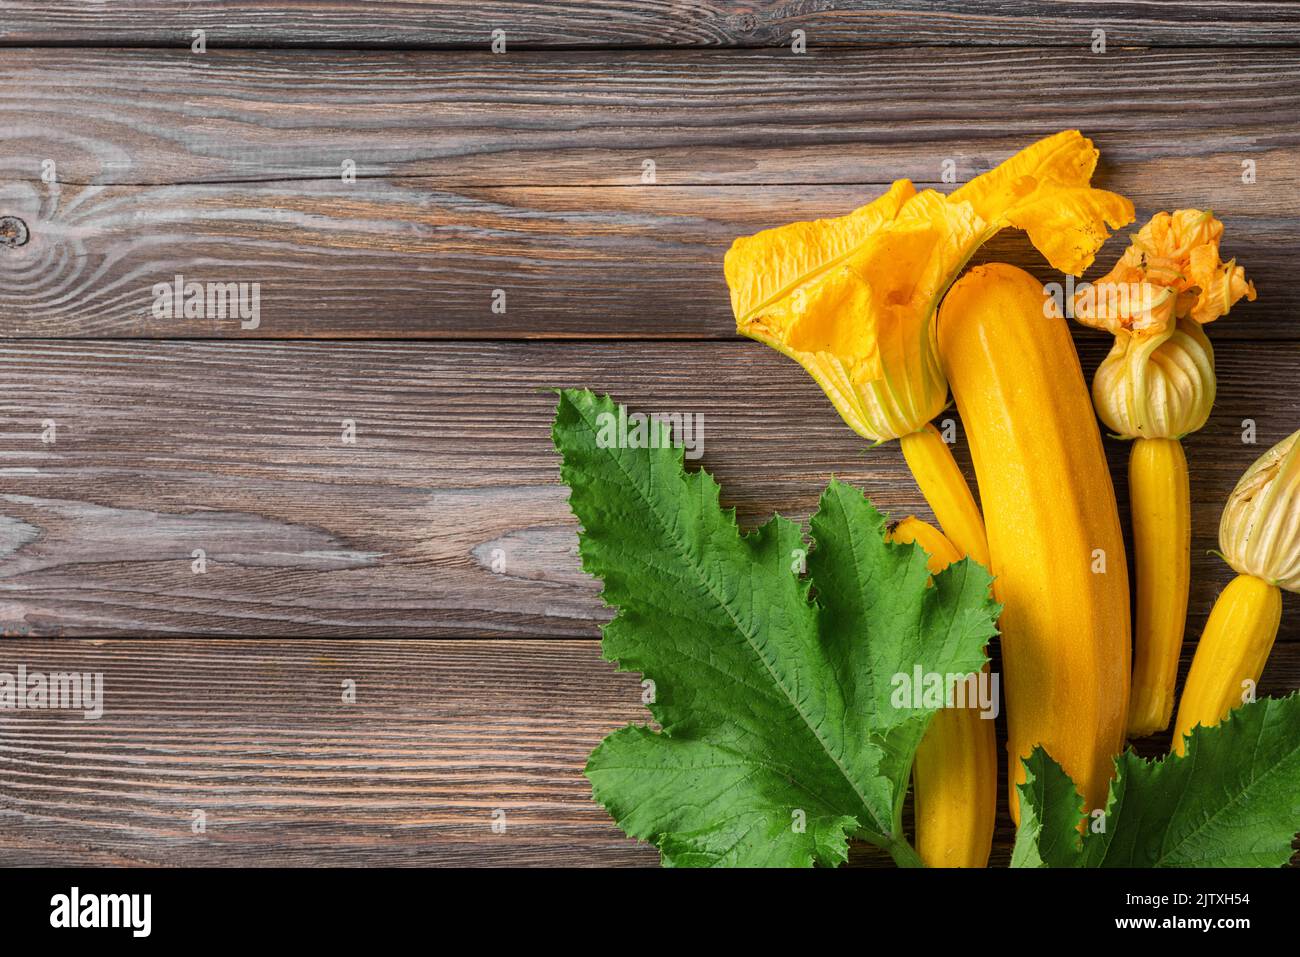 Fresh yellow zucchini or squash with flowers on wooden background. Top view with copy space. Fresh harvested vegetables Stock Photo